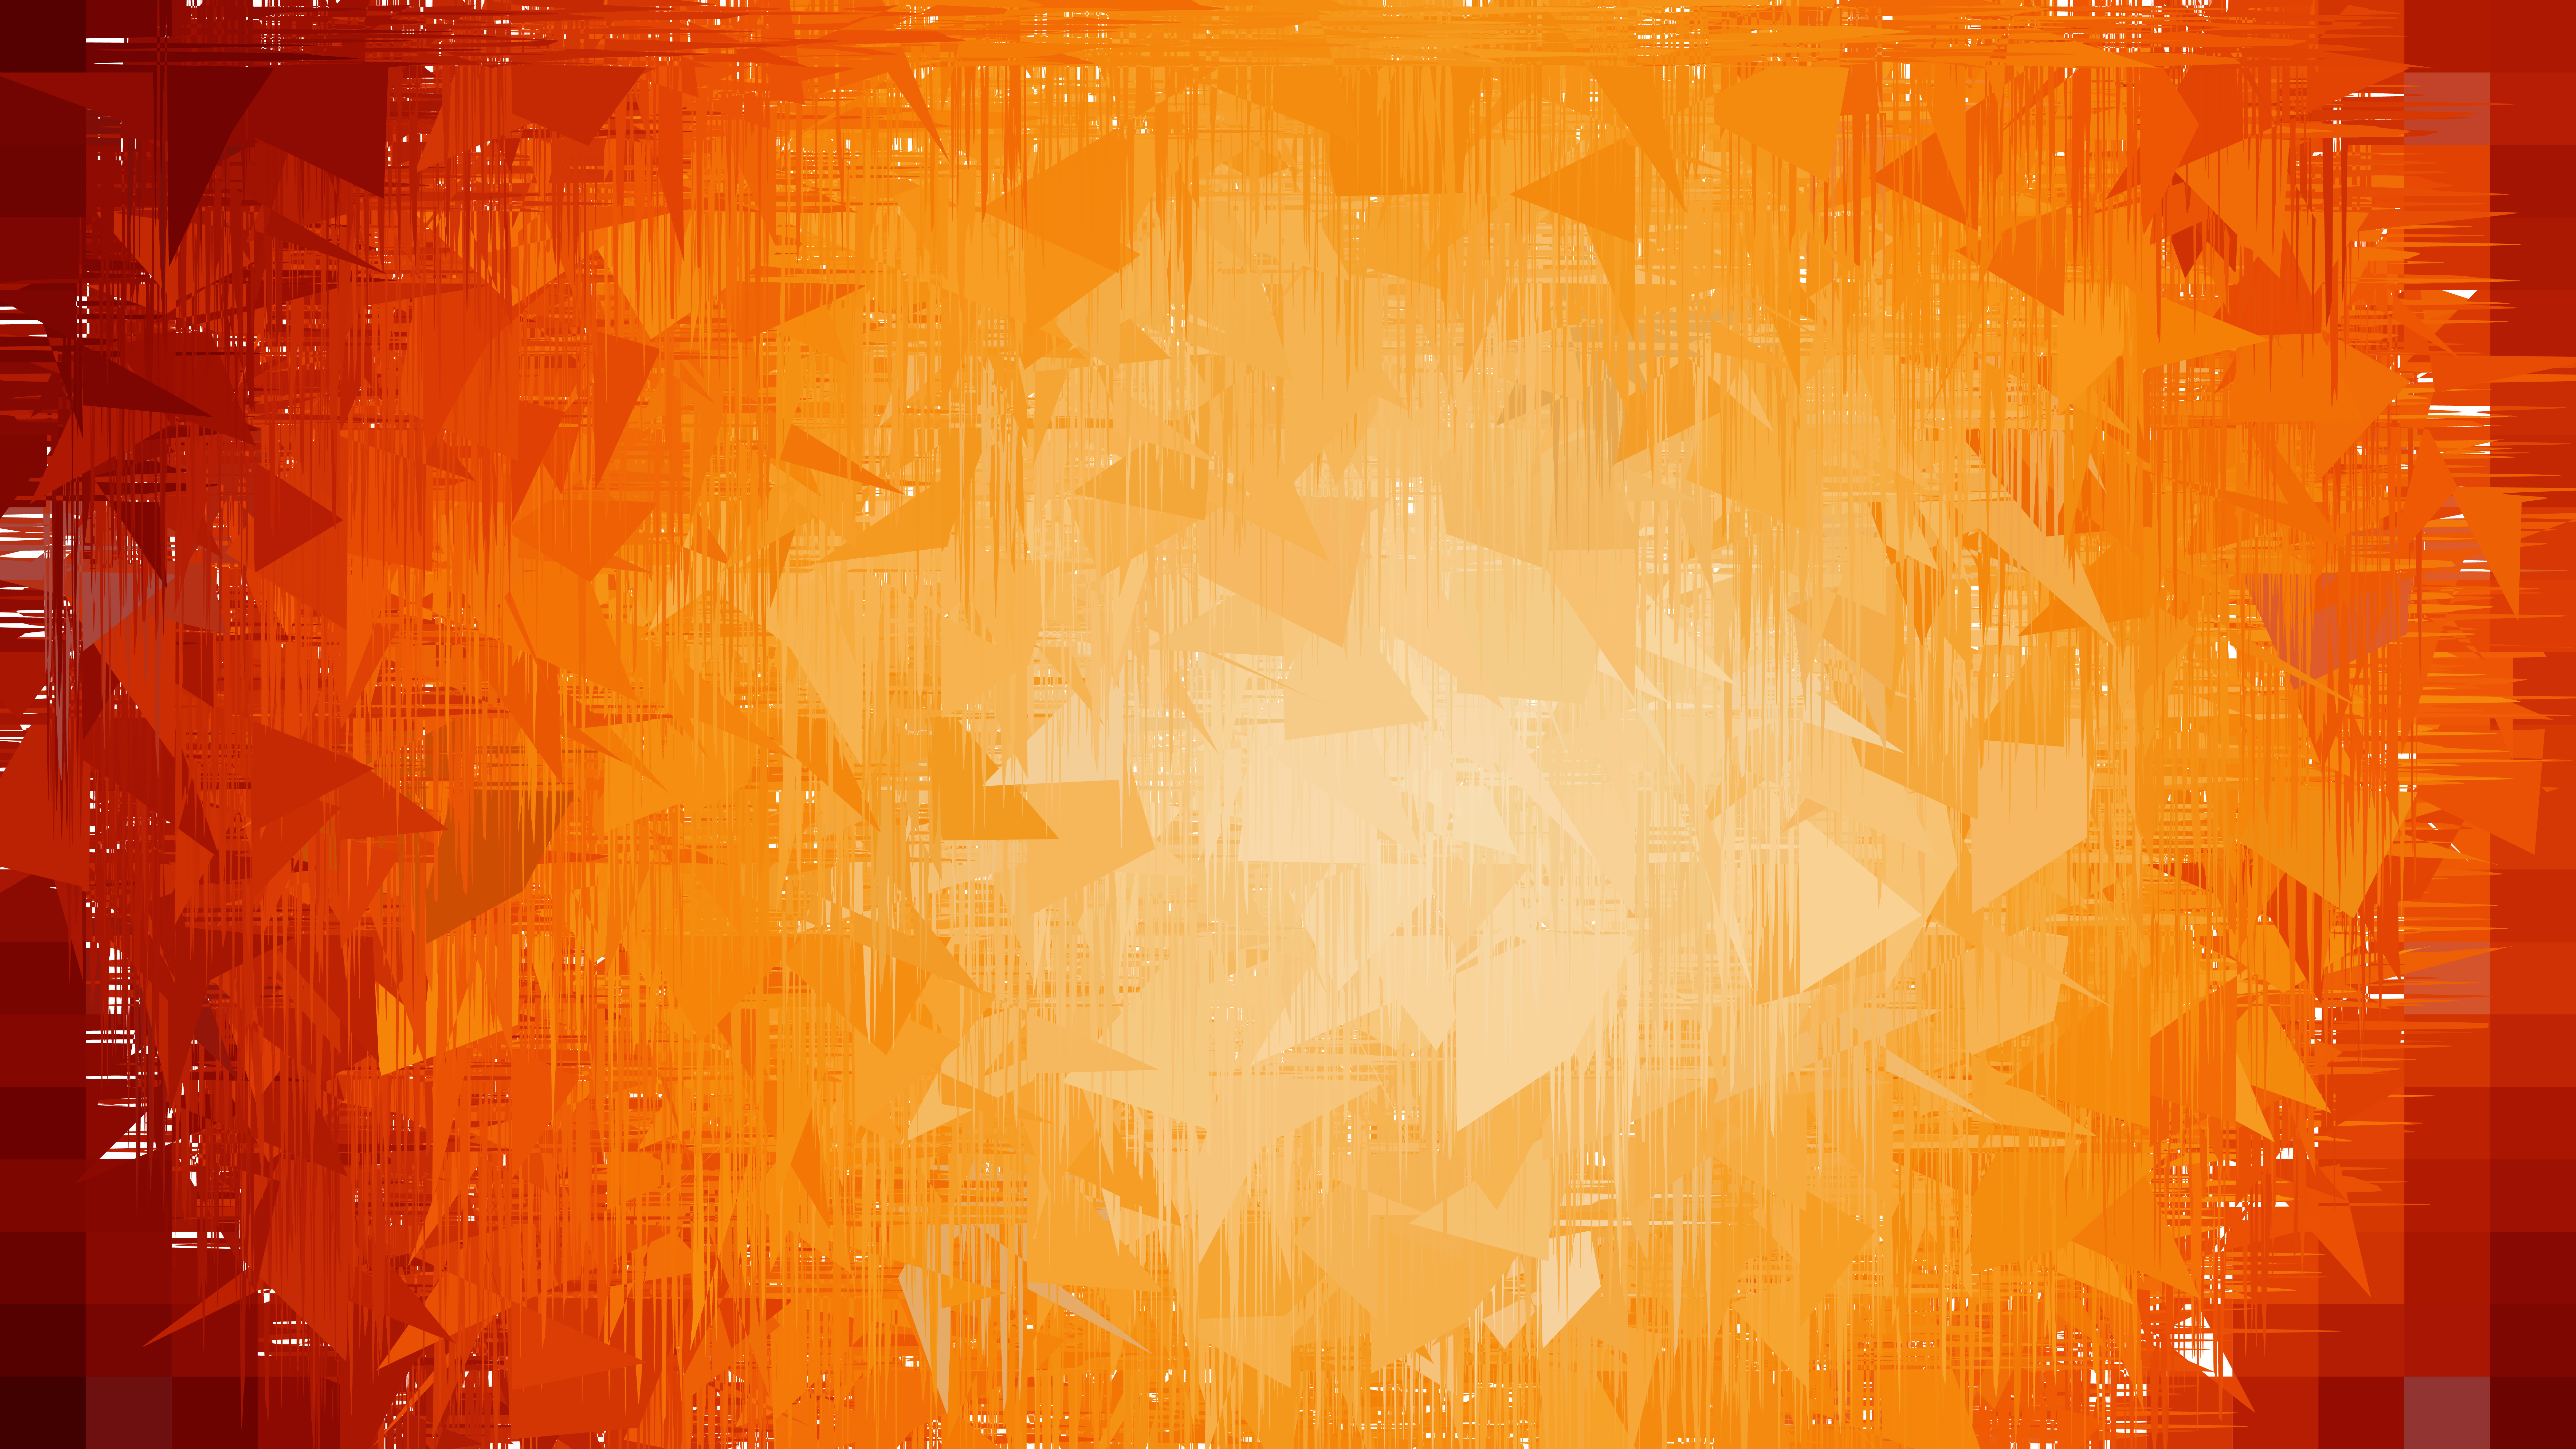 Red And Orange Abstract Texture Background Illustrator